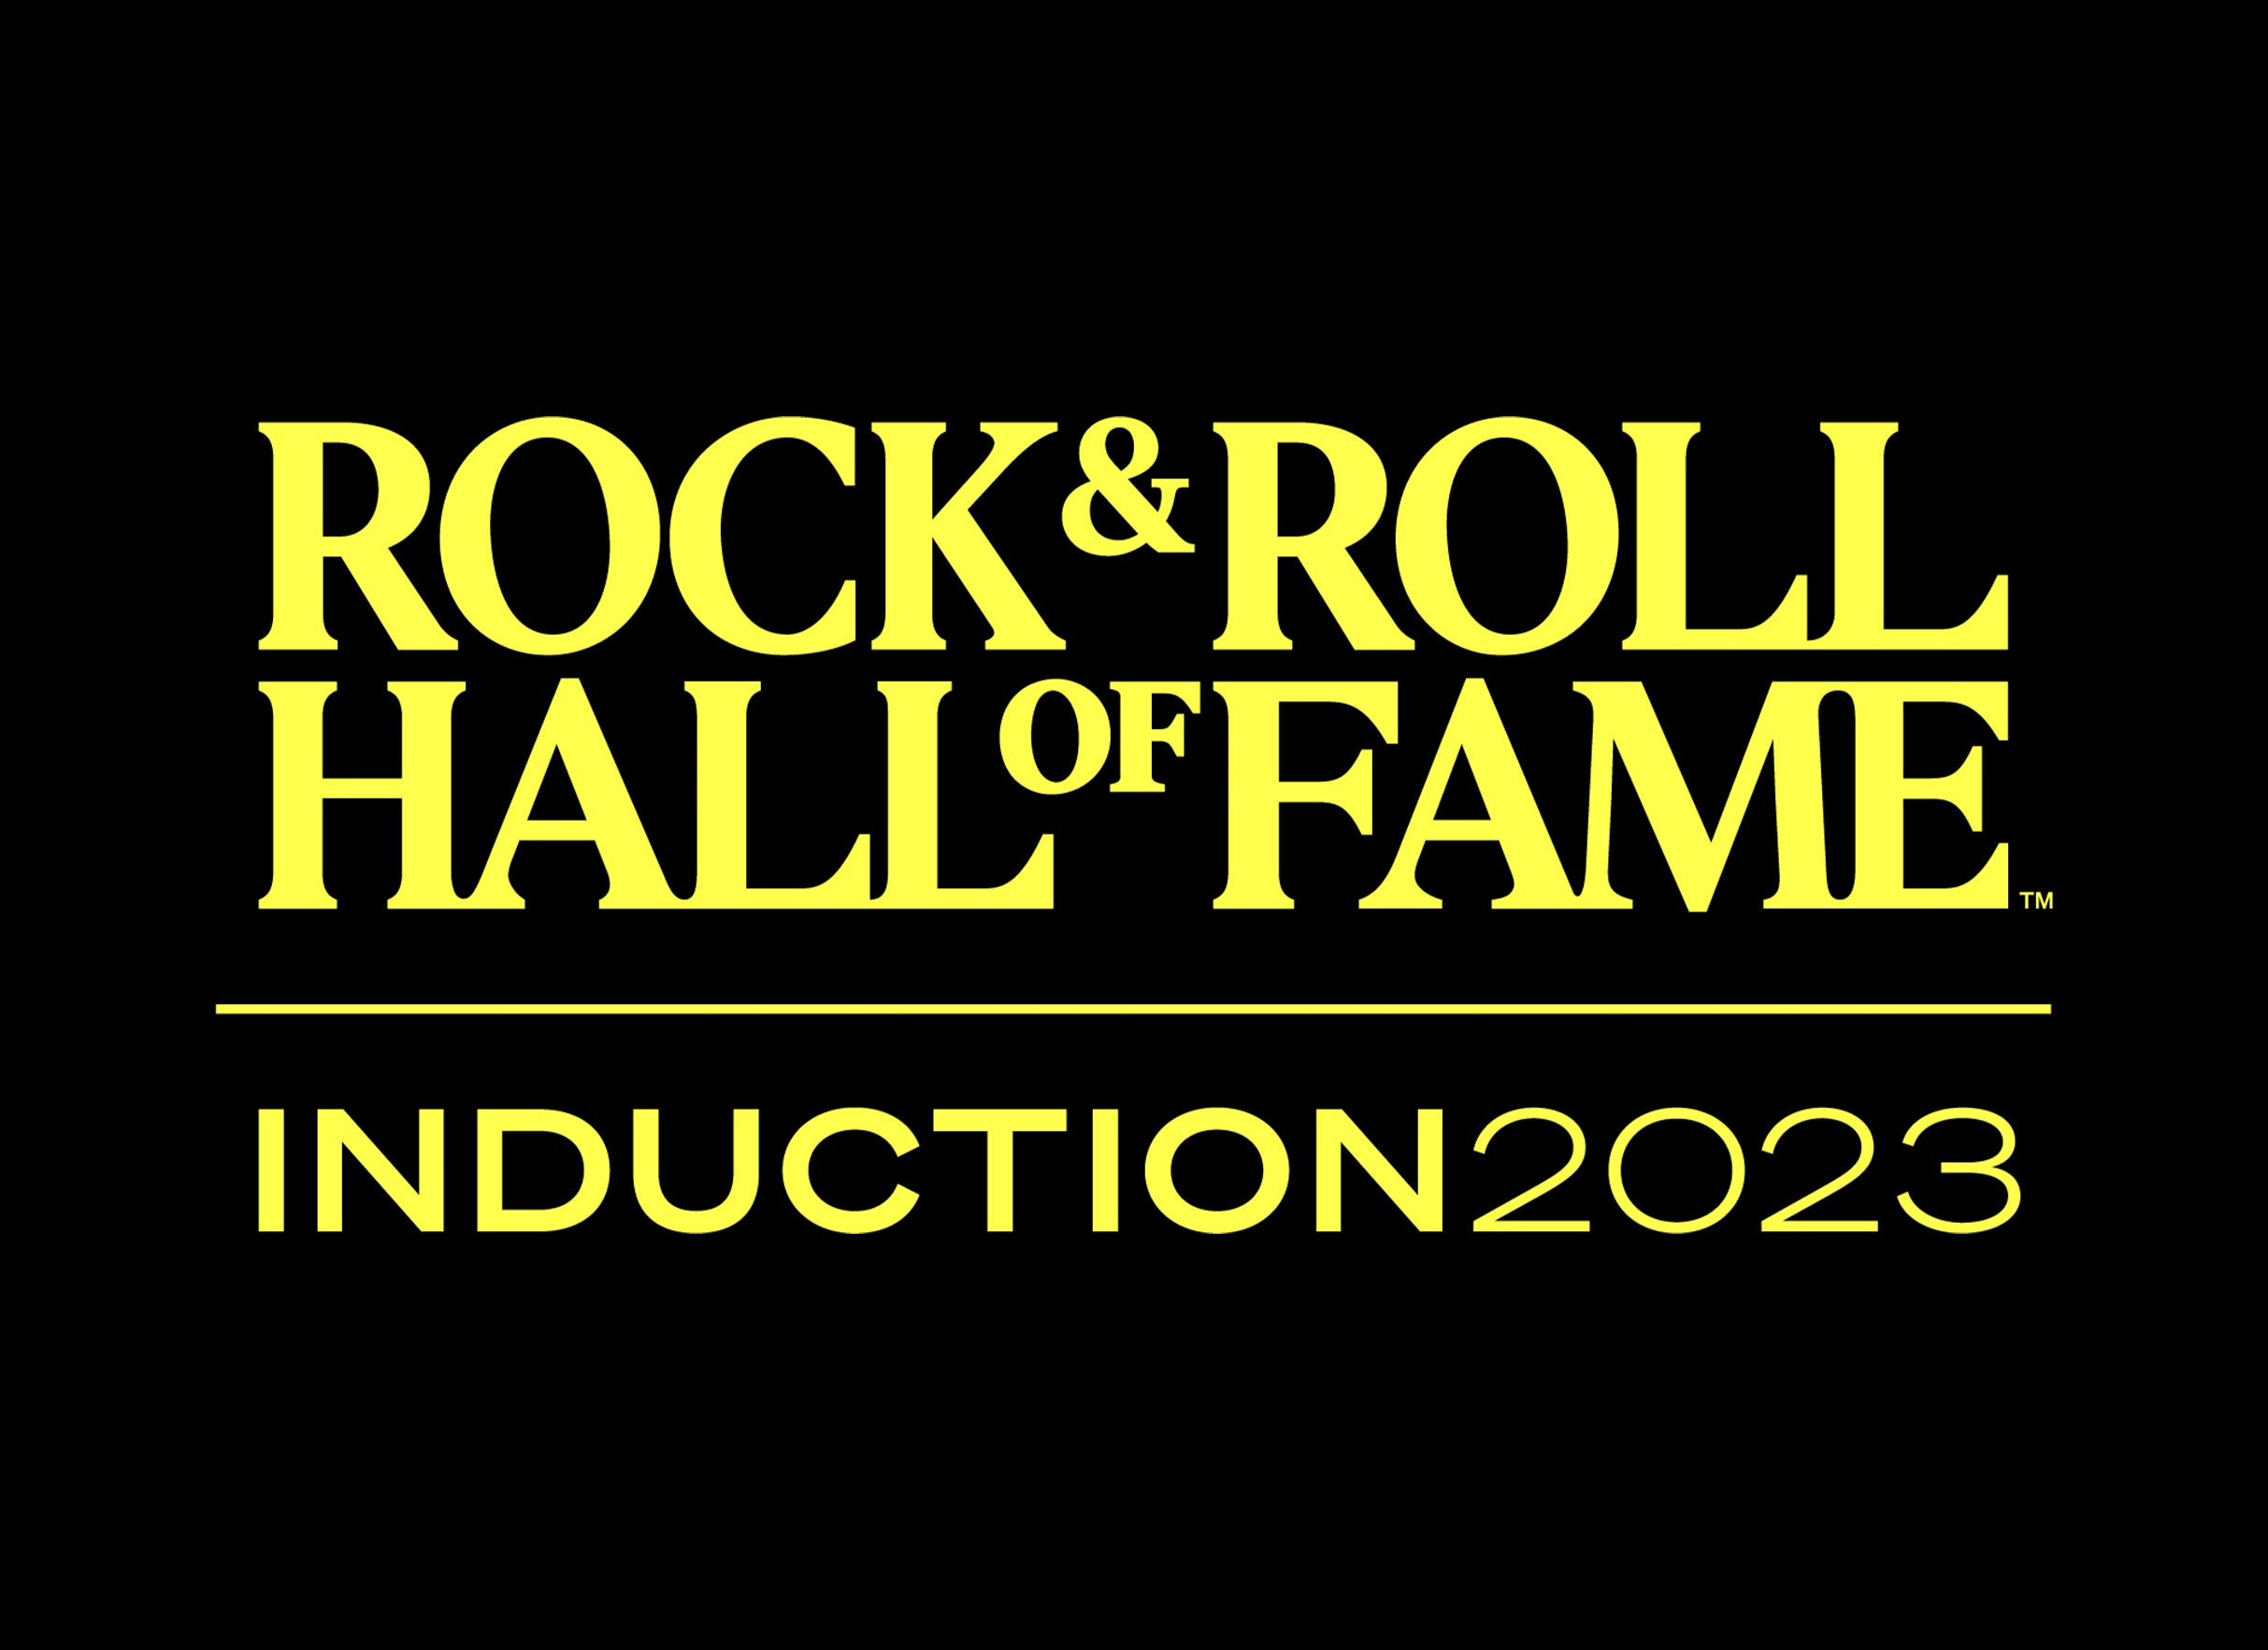 38th Annual Rock & Roll Hall of Fame Induction Ceremony in Brooklyn promo photo for Official Platinum Preslae #1 presale offer code